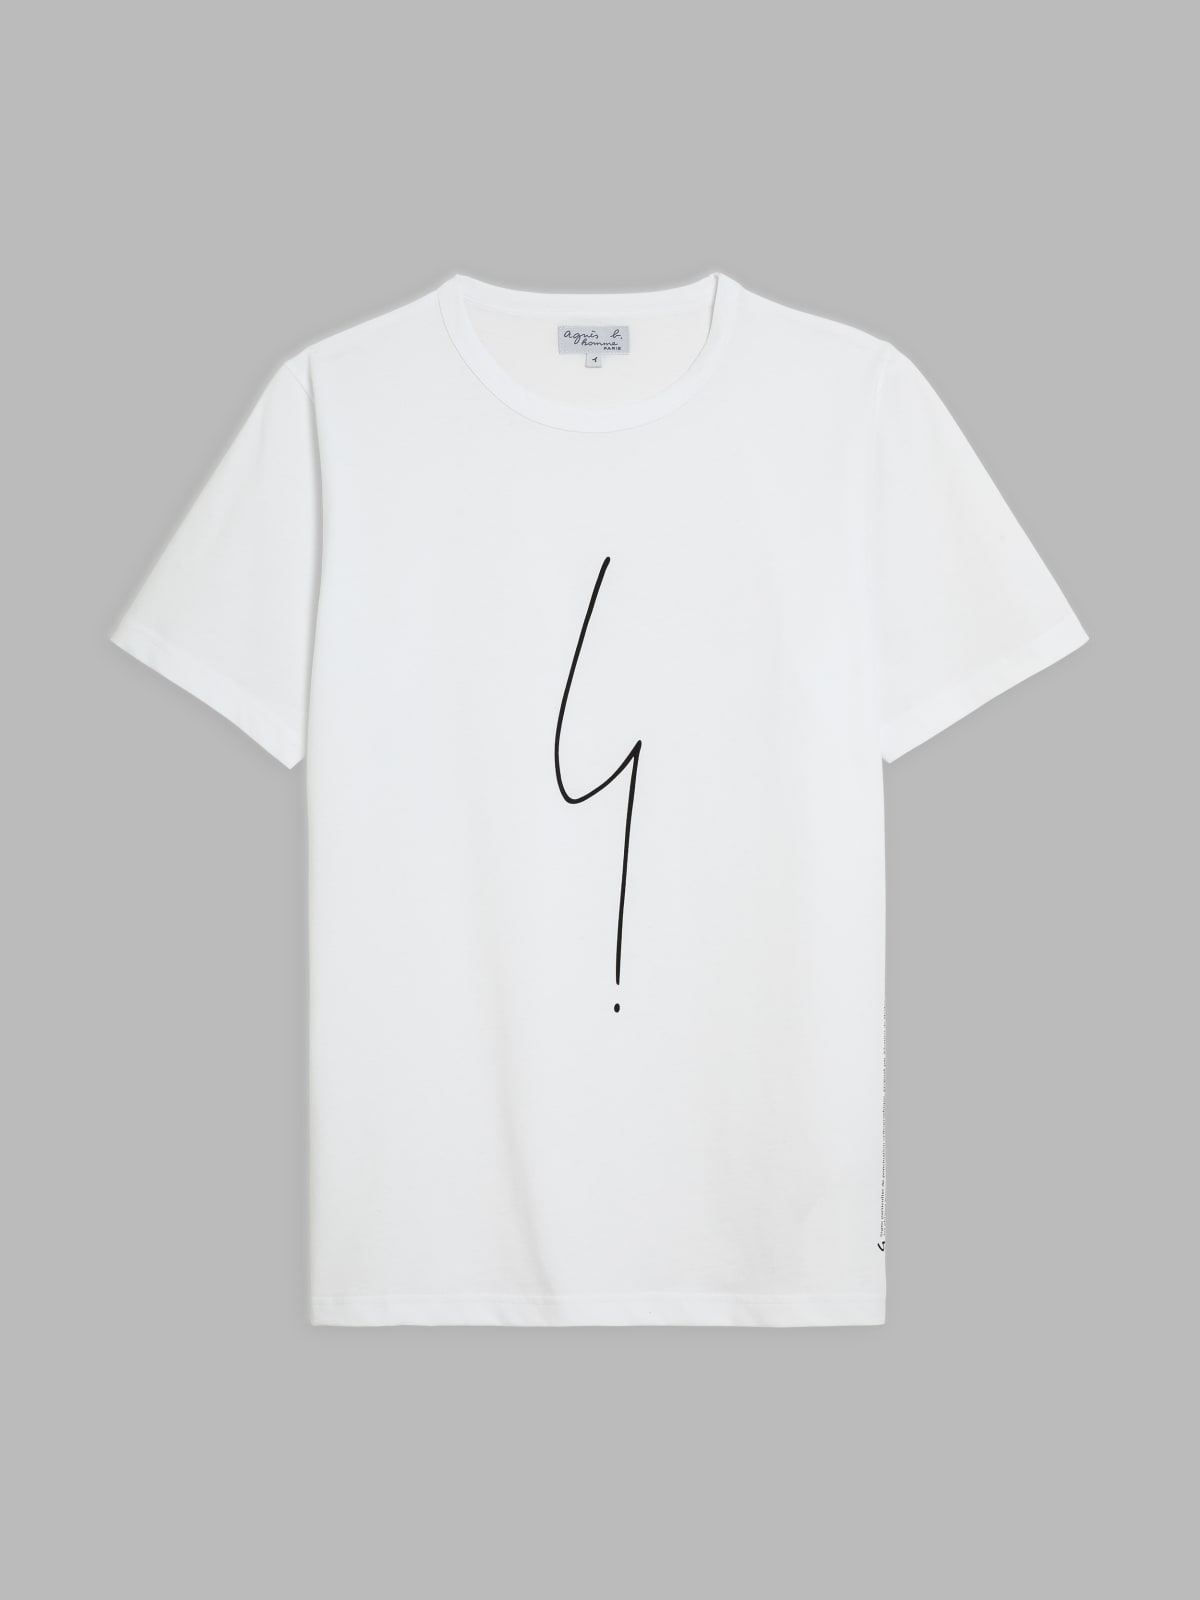 white short sleeves Coulos "irony mark" t-shirt